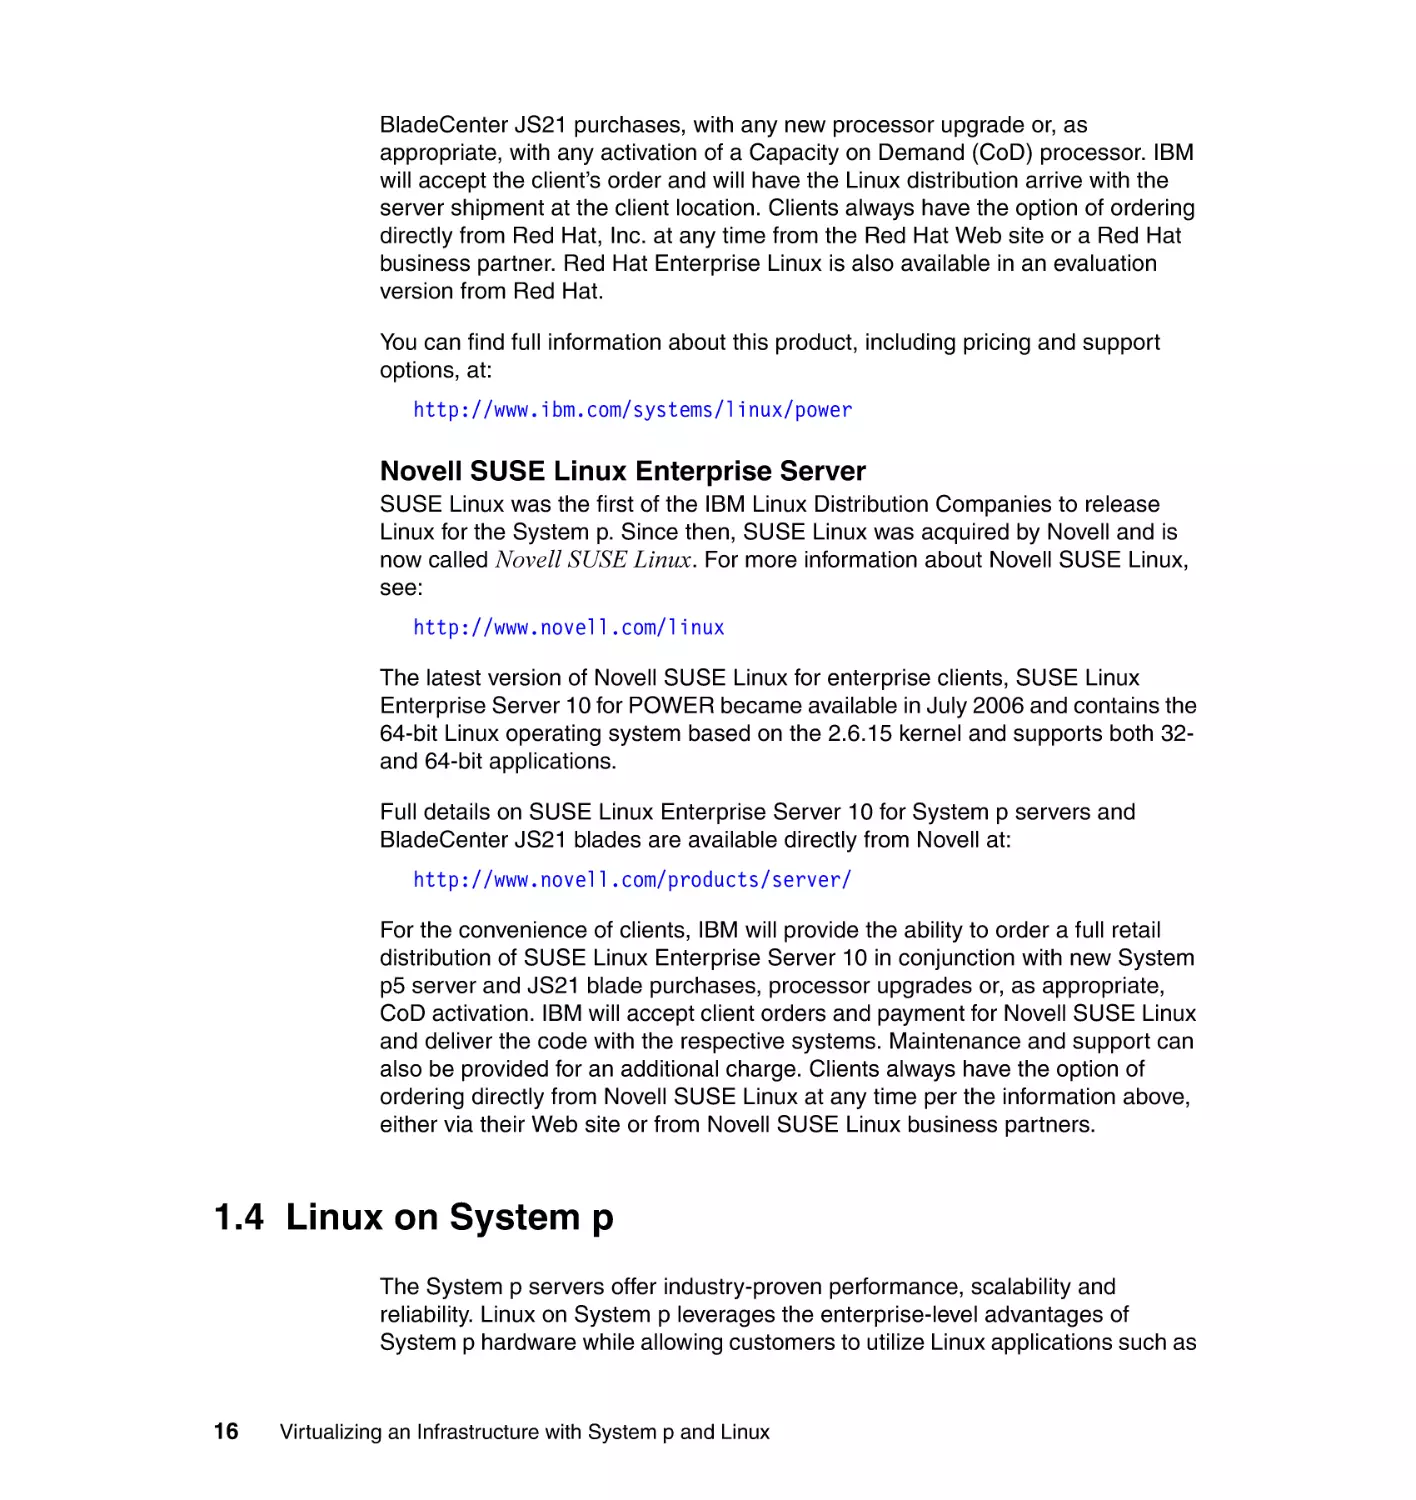 1.4 Linux on System p